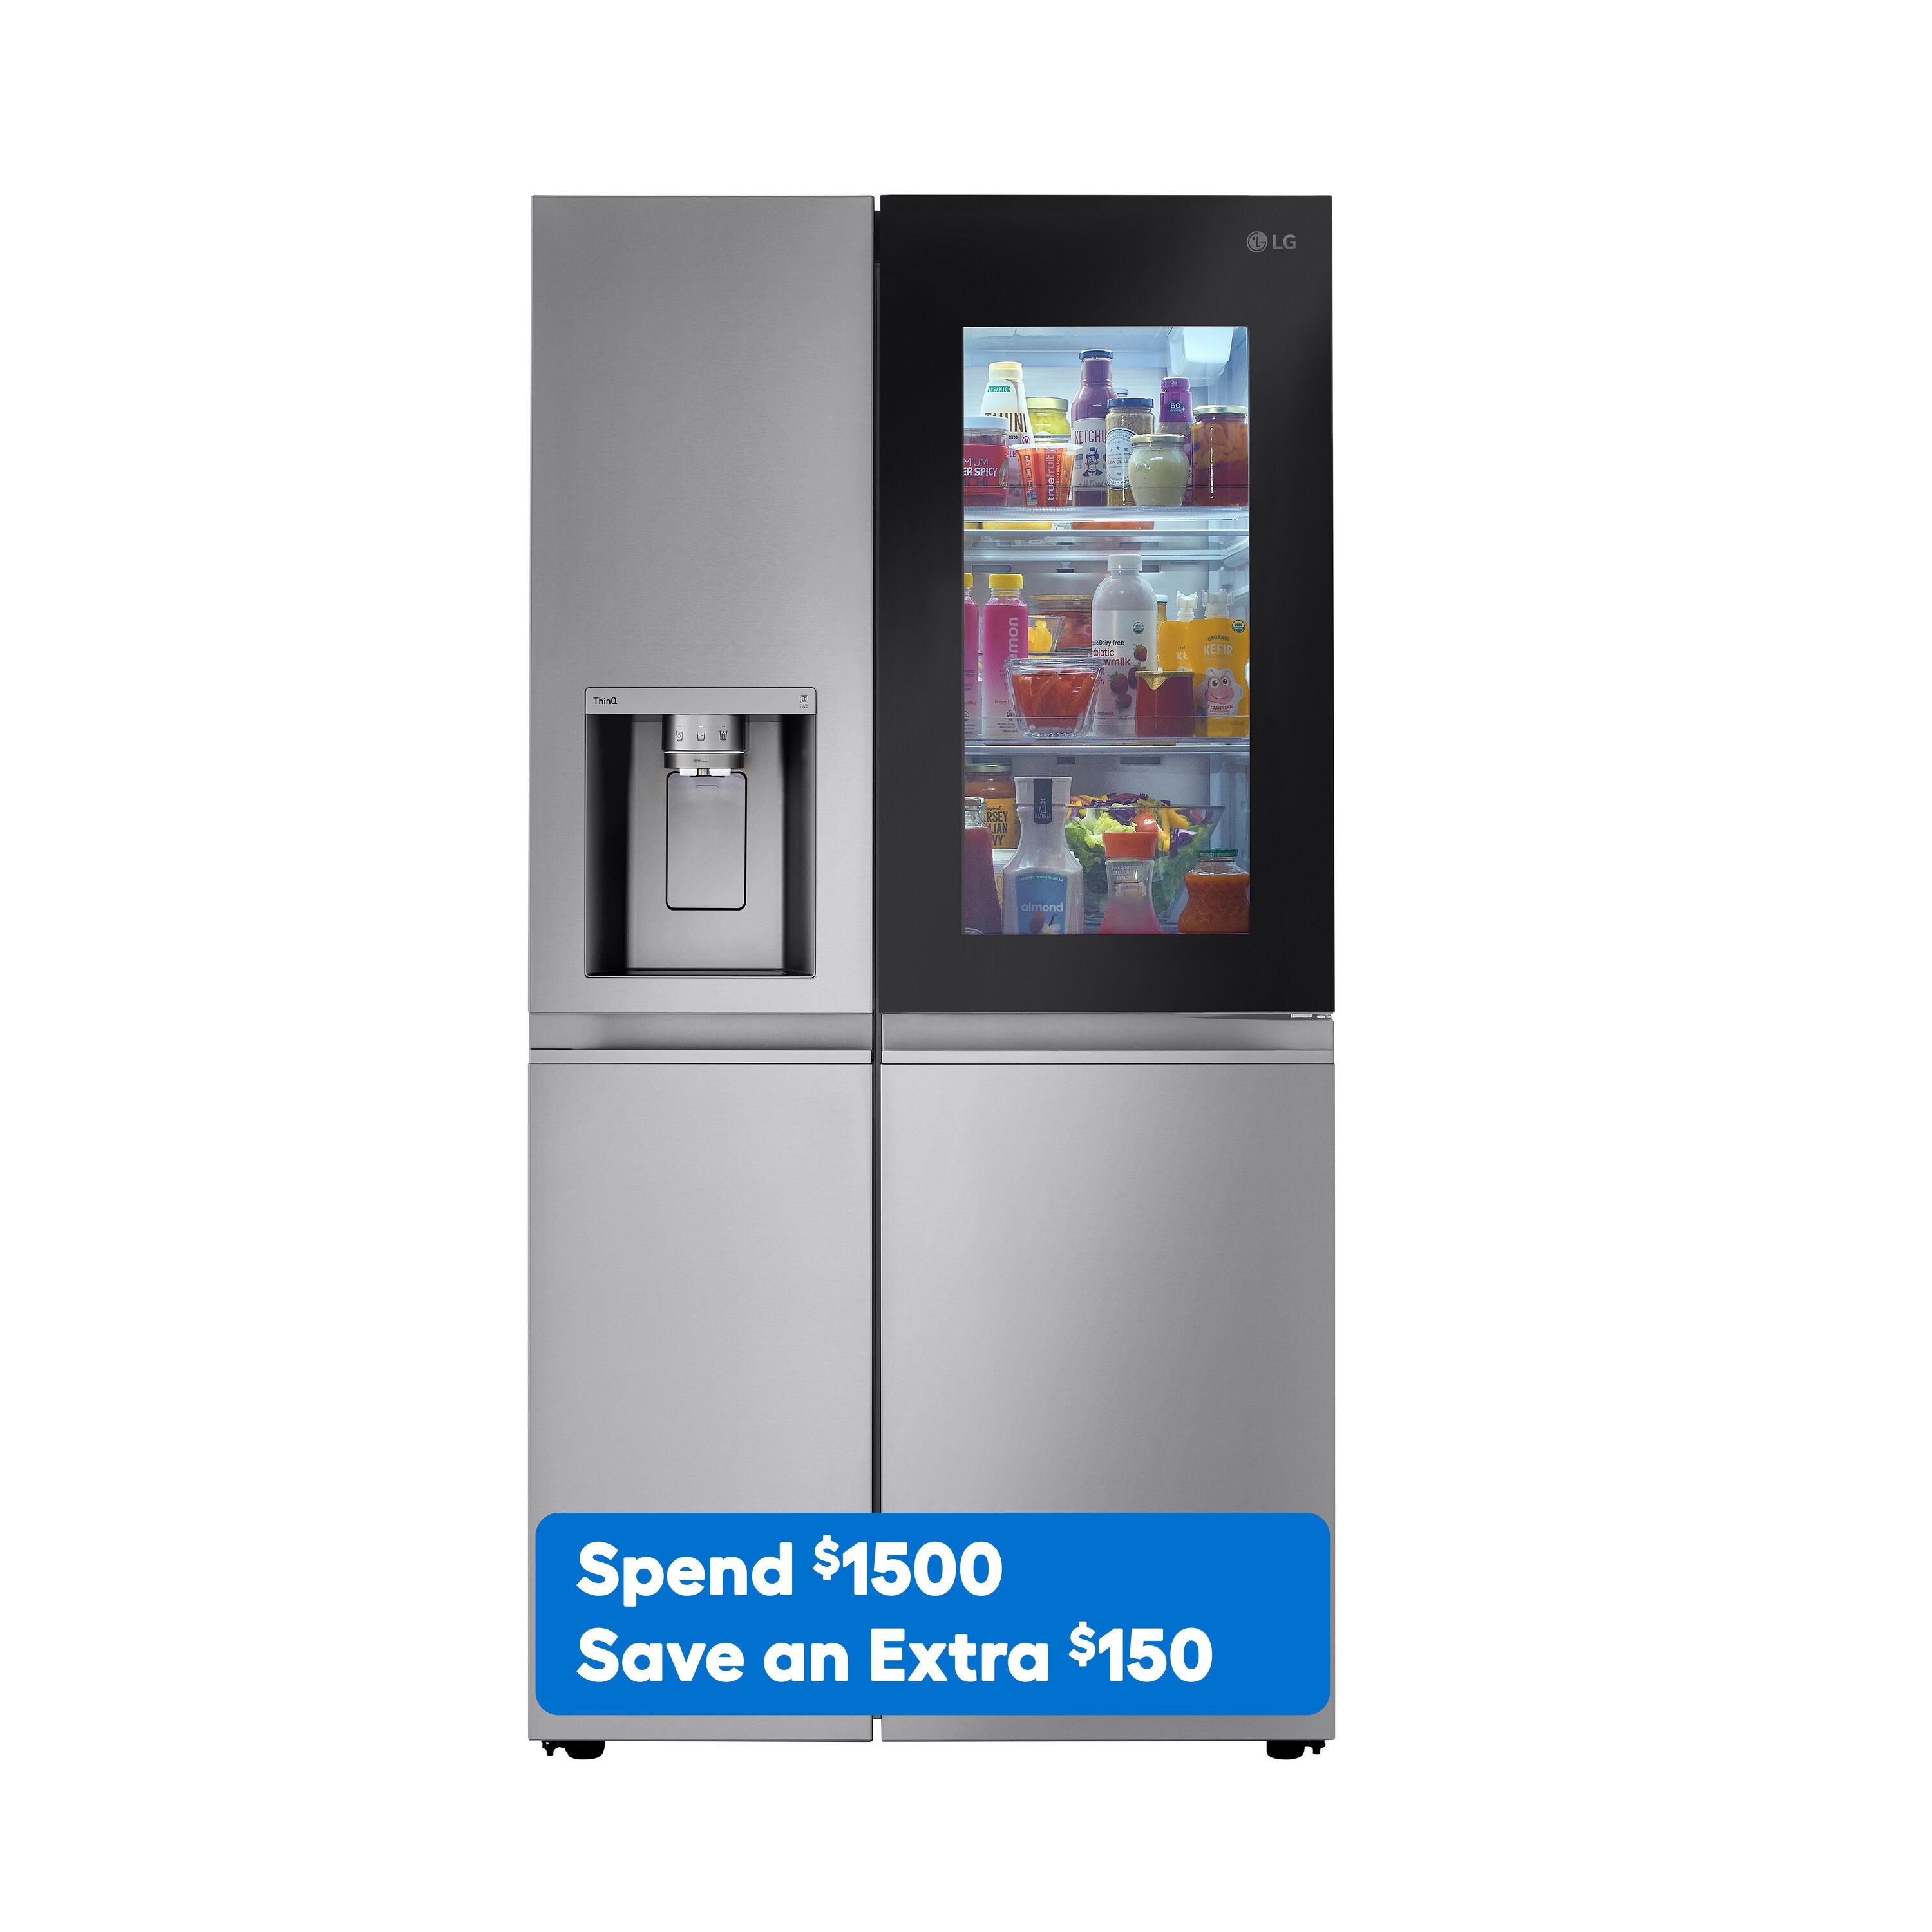 27.1-cu ft LG InstaView Craft Ice Side-by-Side Refrigerator Smart with Dual Ice Maker, Water and Ice Dispenser (Printproof Stainless Steel) $1046 + $29 Shipping or Pickup at Lowes